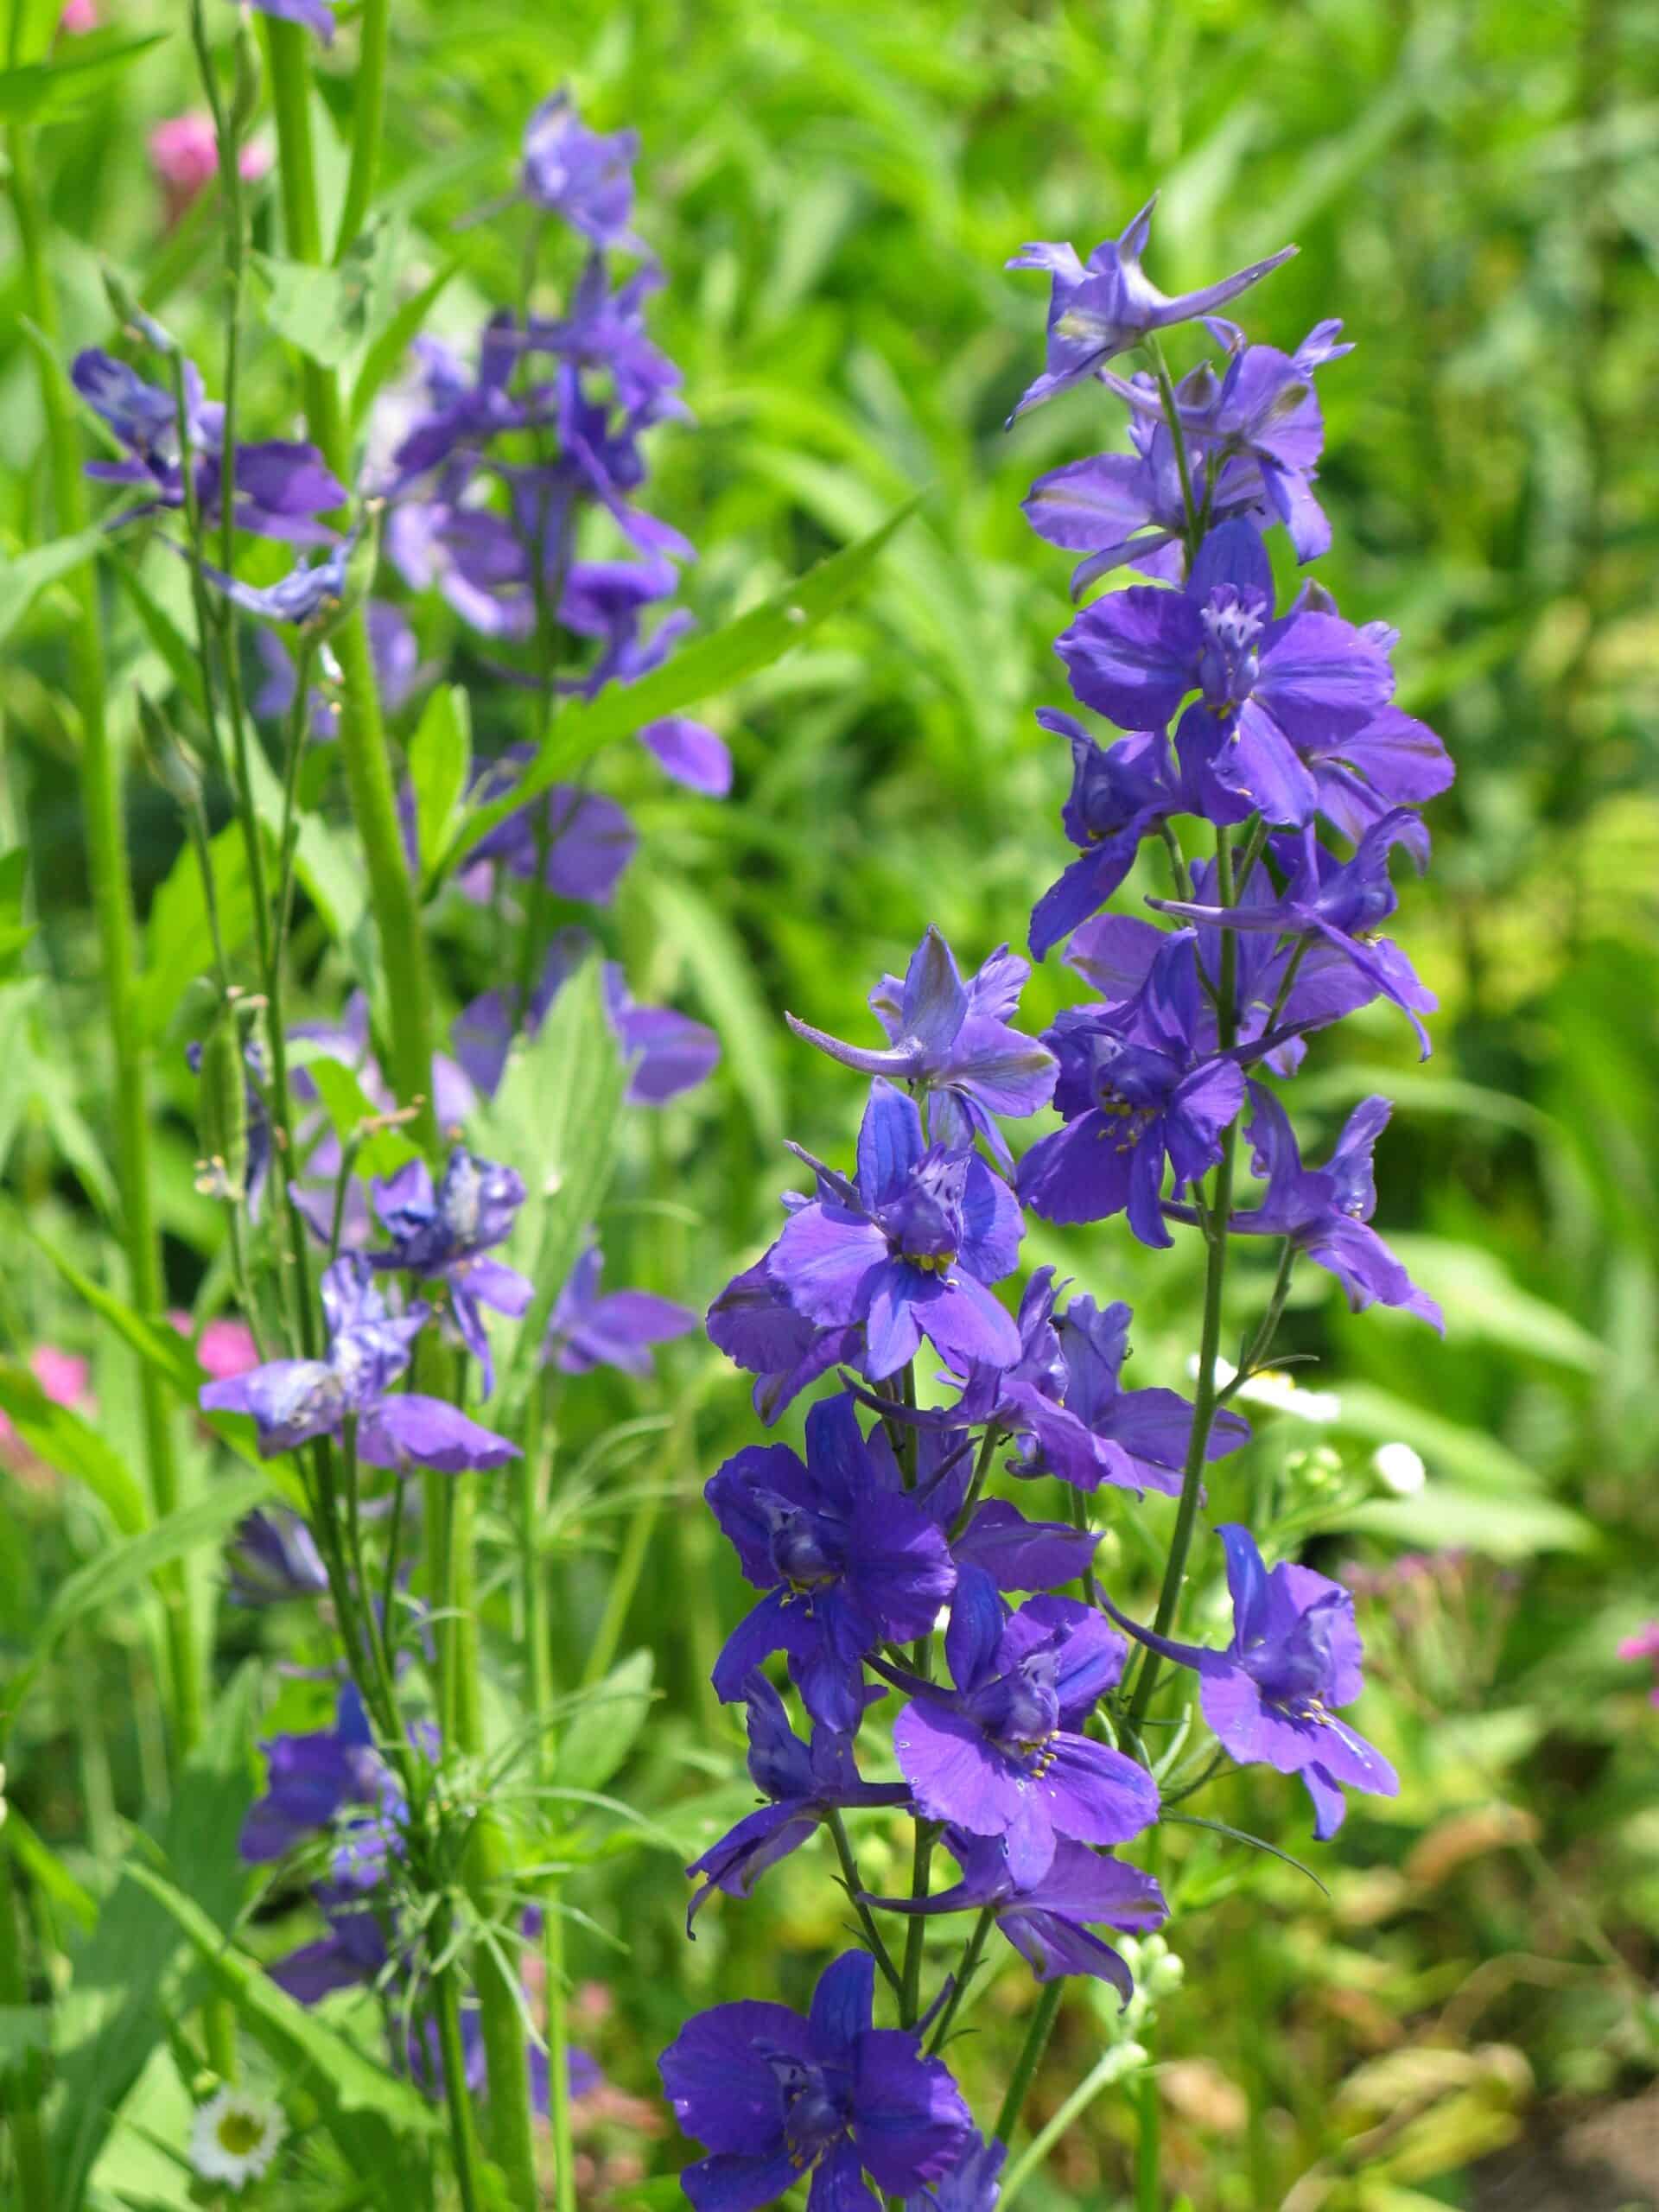 How to Care for Larkspur